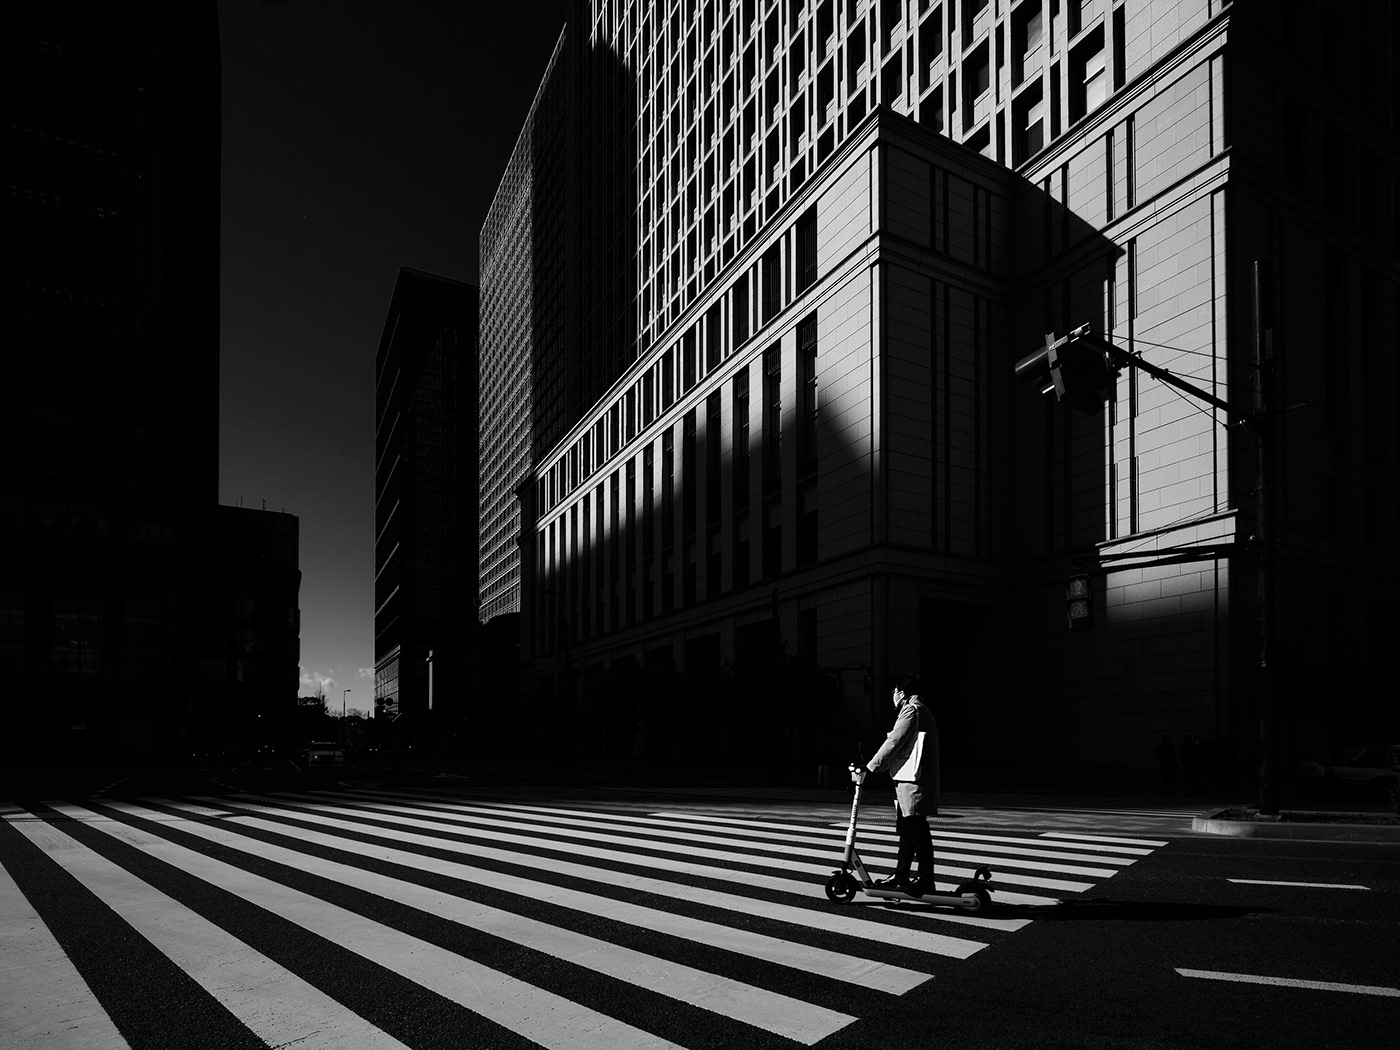 street photography black and white FINEART surreal